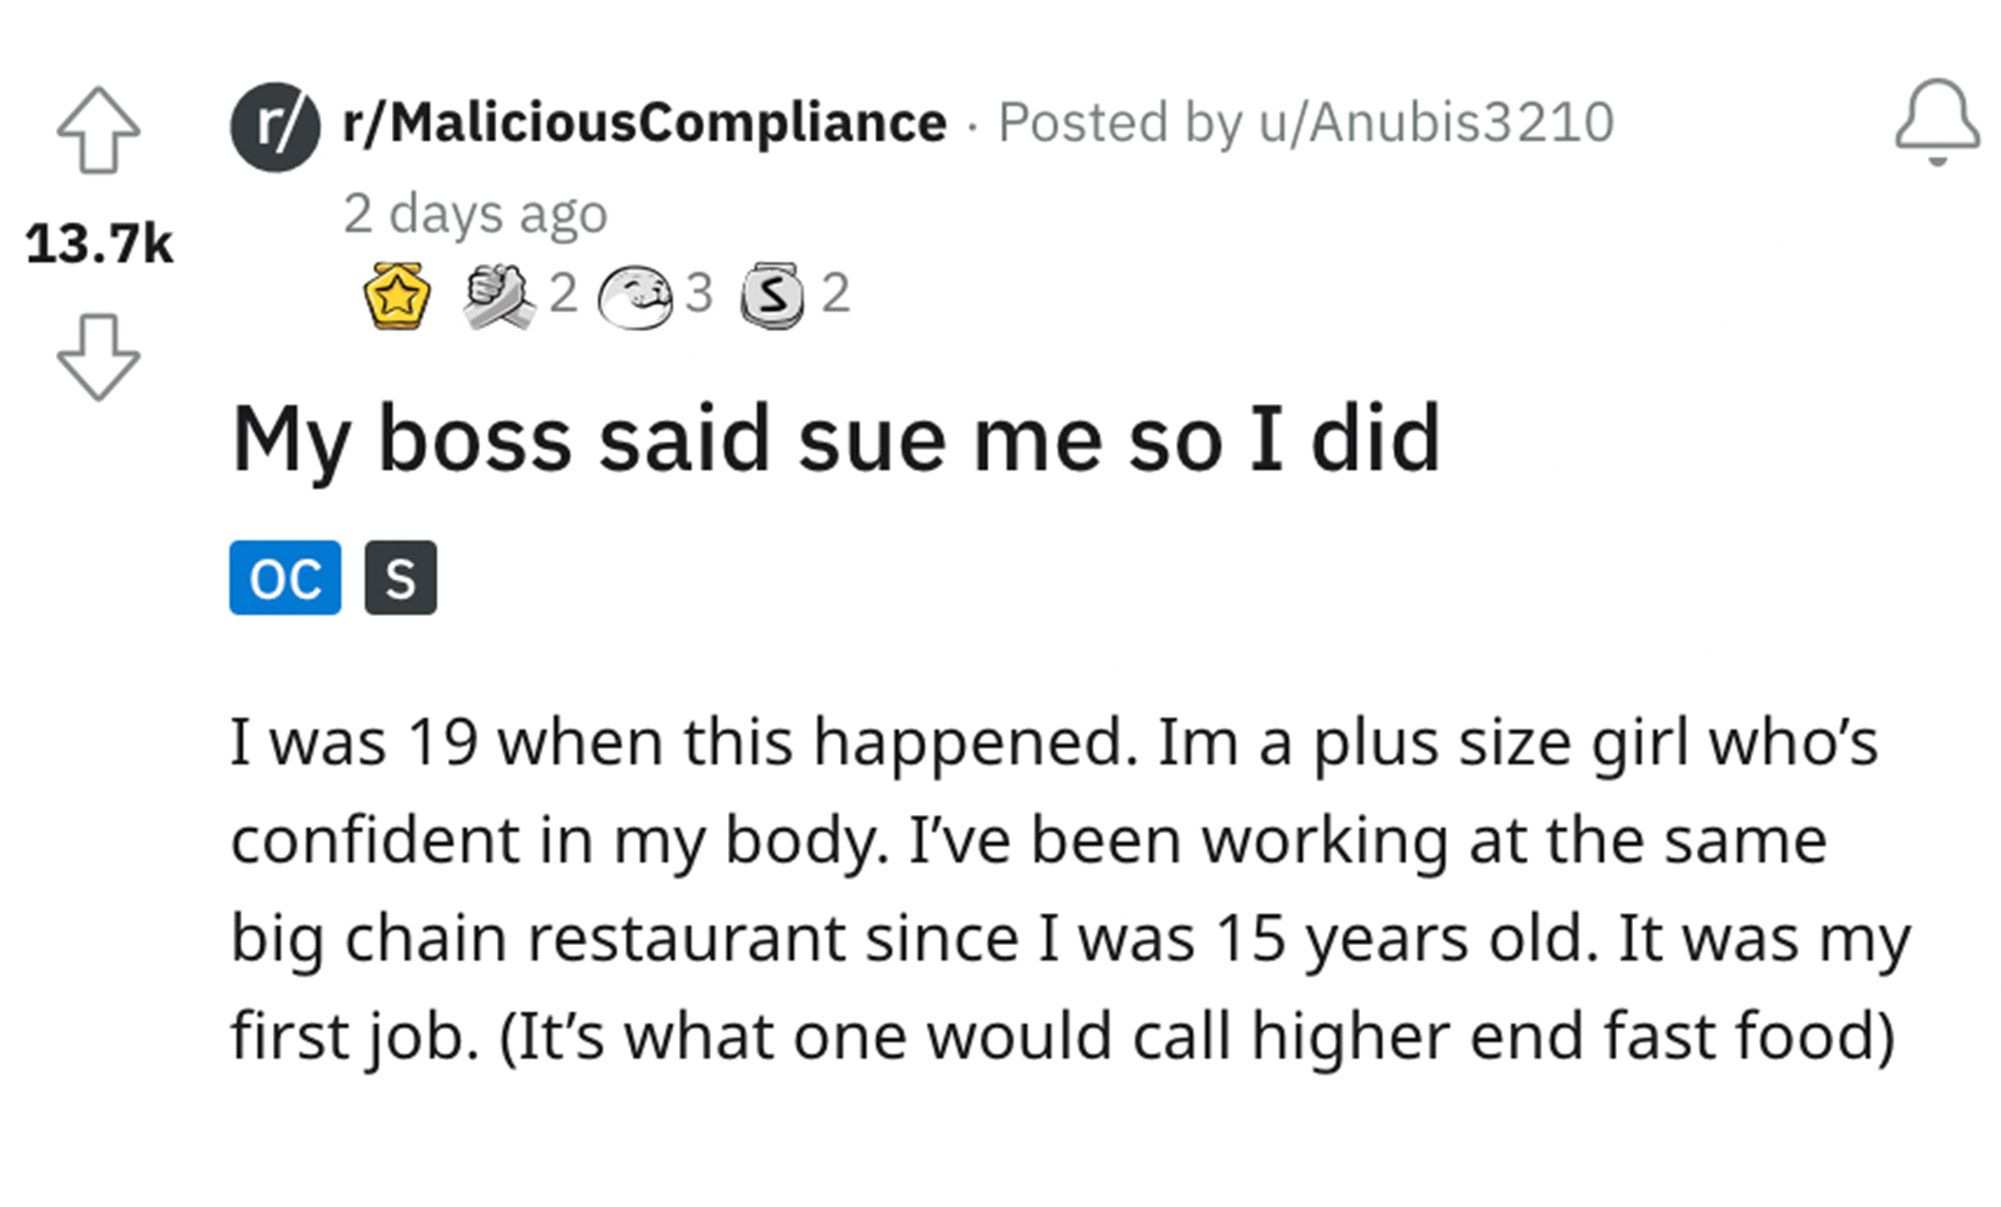 employee sues boss story - paper - rrMaliciousCompliance Posted by uAnubis3210 2 days ago 2 @ 3 32 My boss said sue me so I did Oc S I was 19 when this happened. Im a plus size girl who's confident in my body. I've been working at the same big chain resta